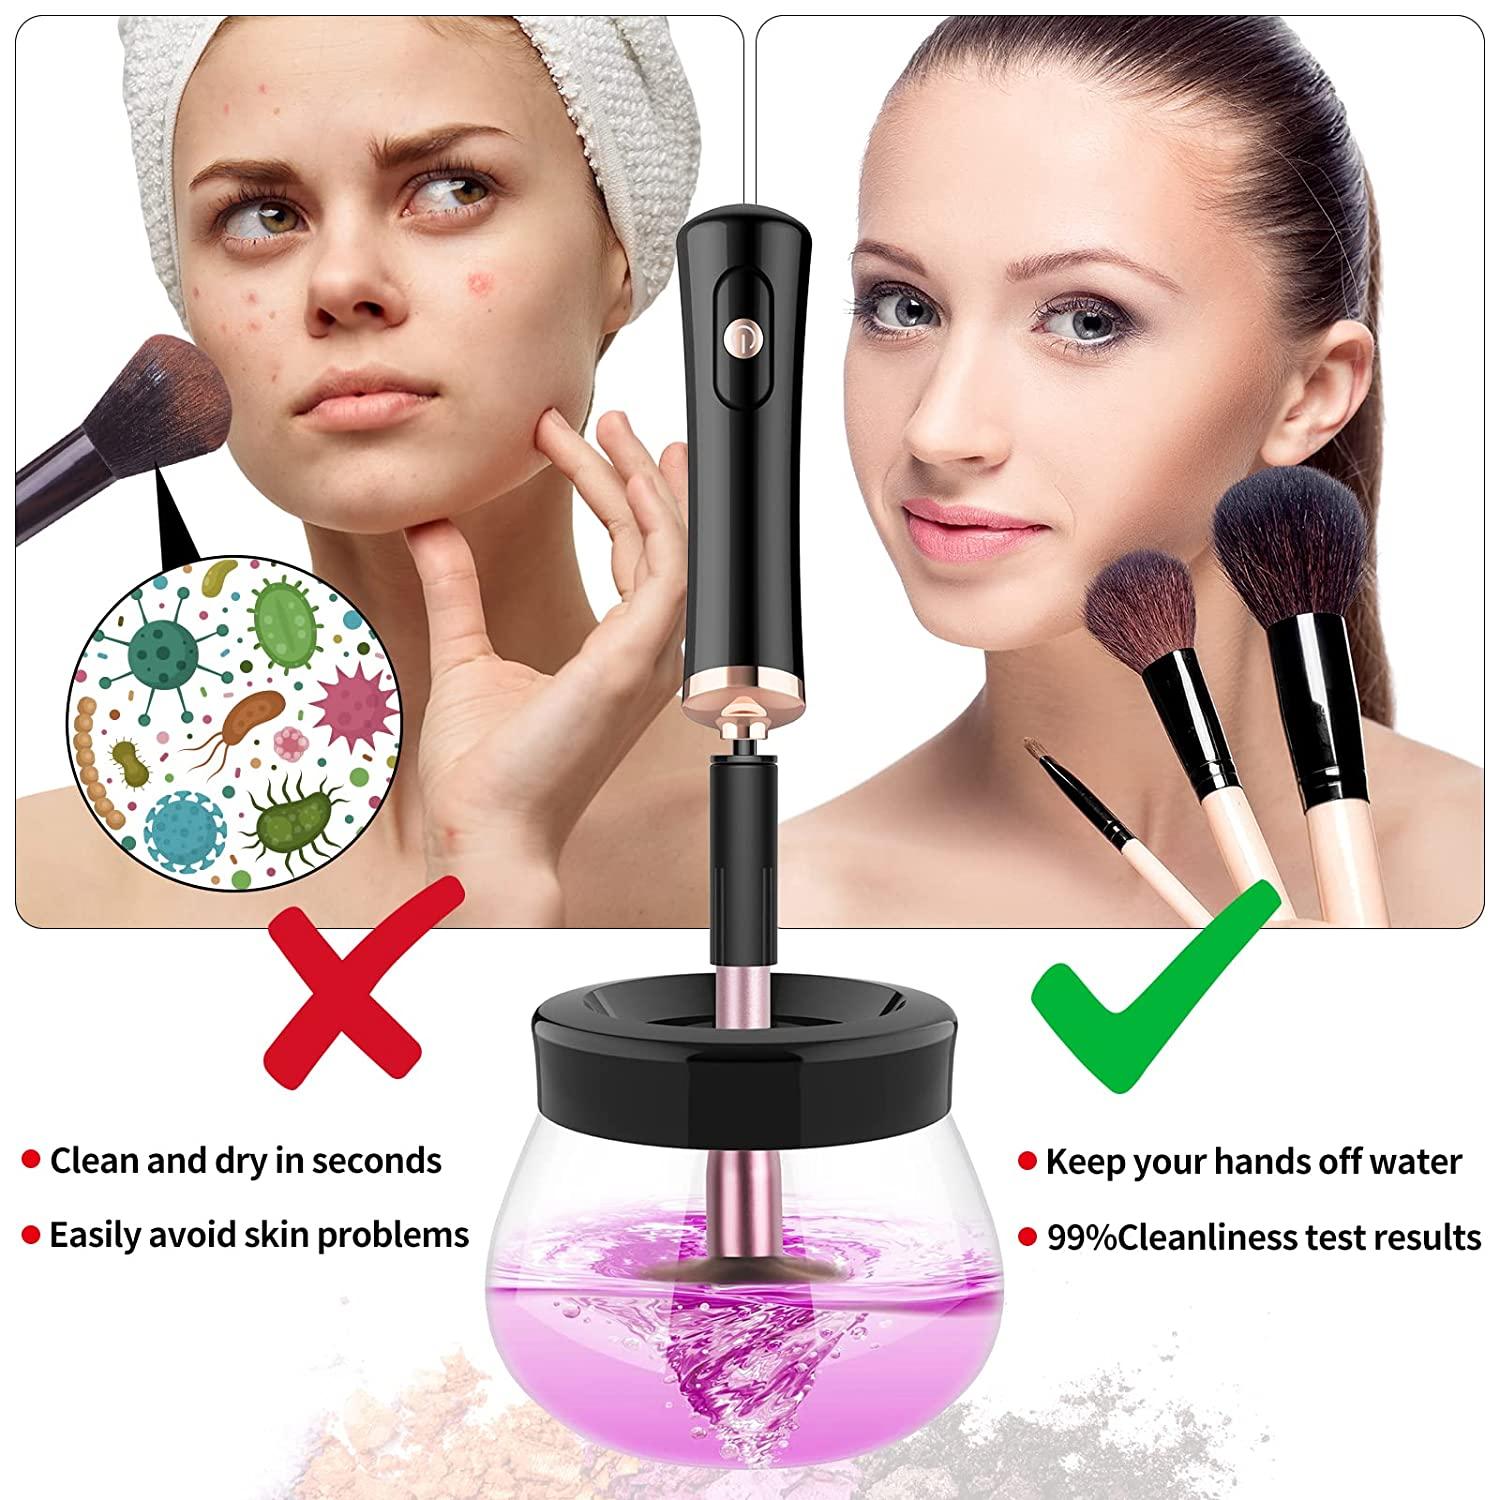 Professional Automatic Deep And Fast Makeup Brush Cleaner & Dryer